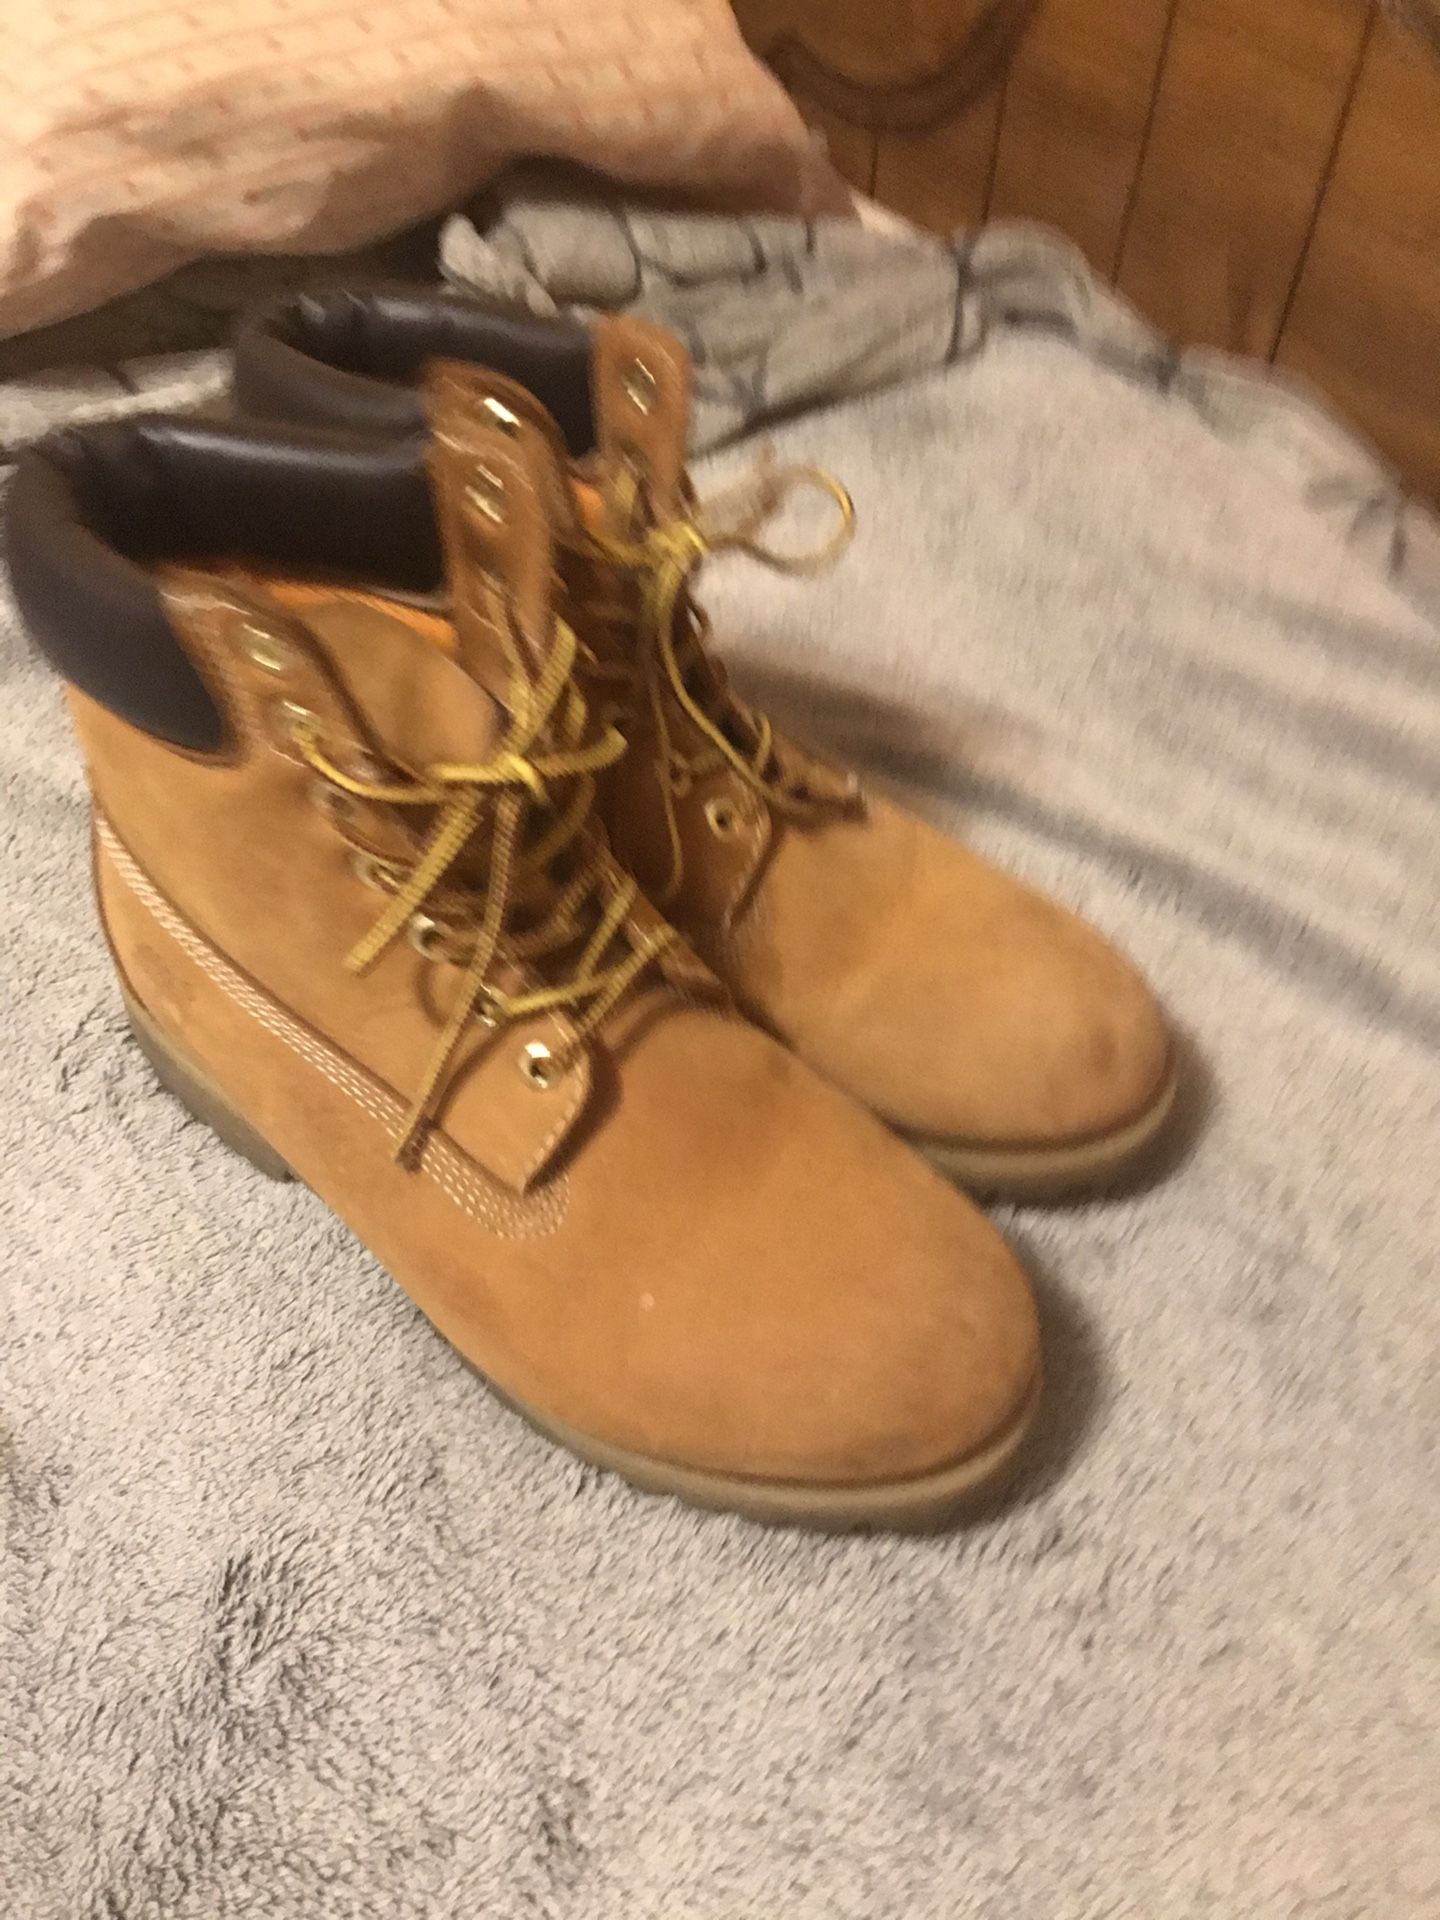 Used timberland boots